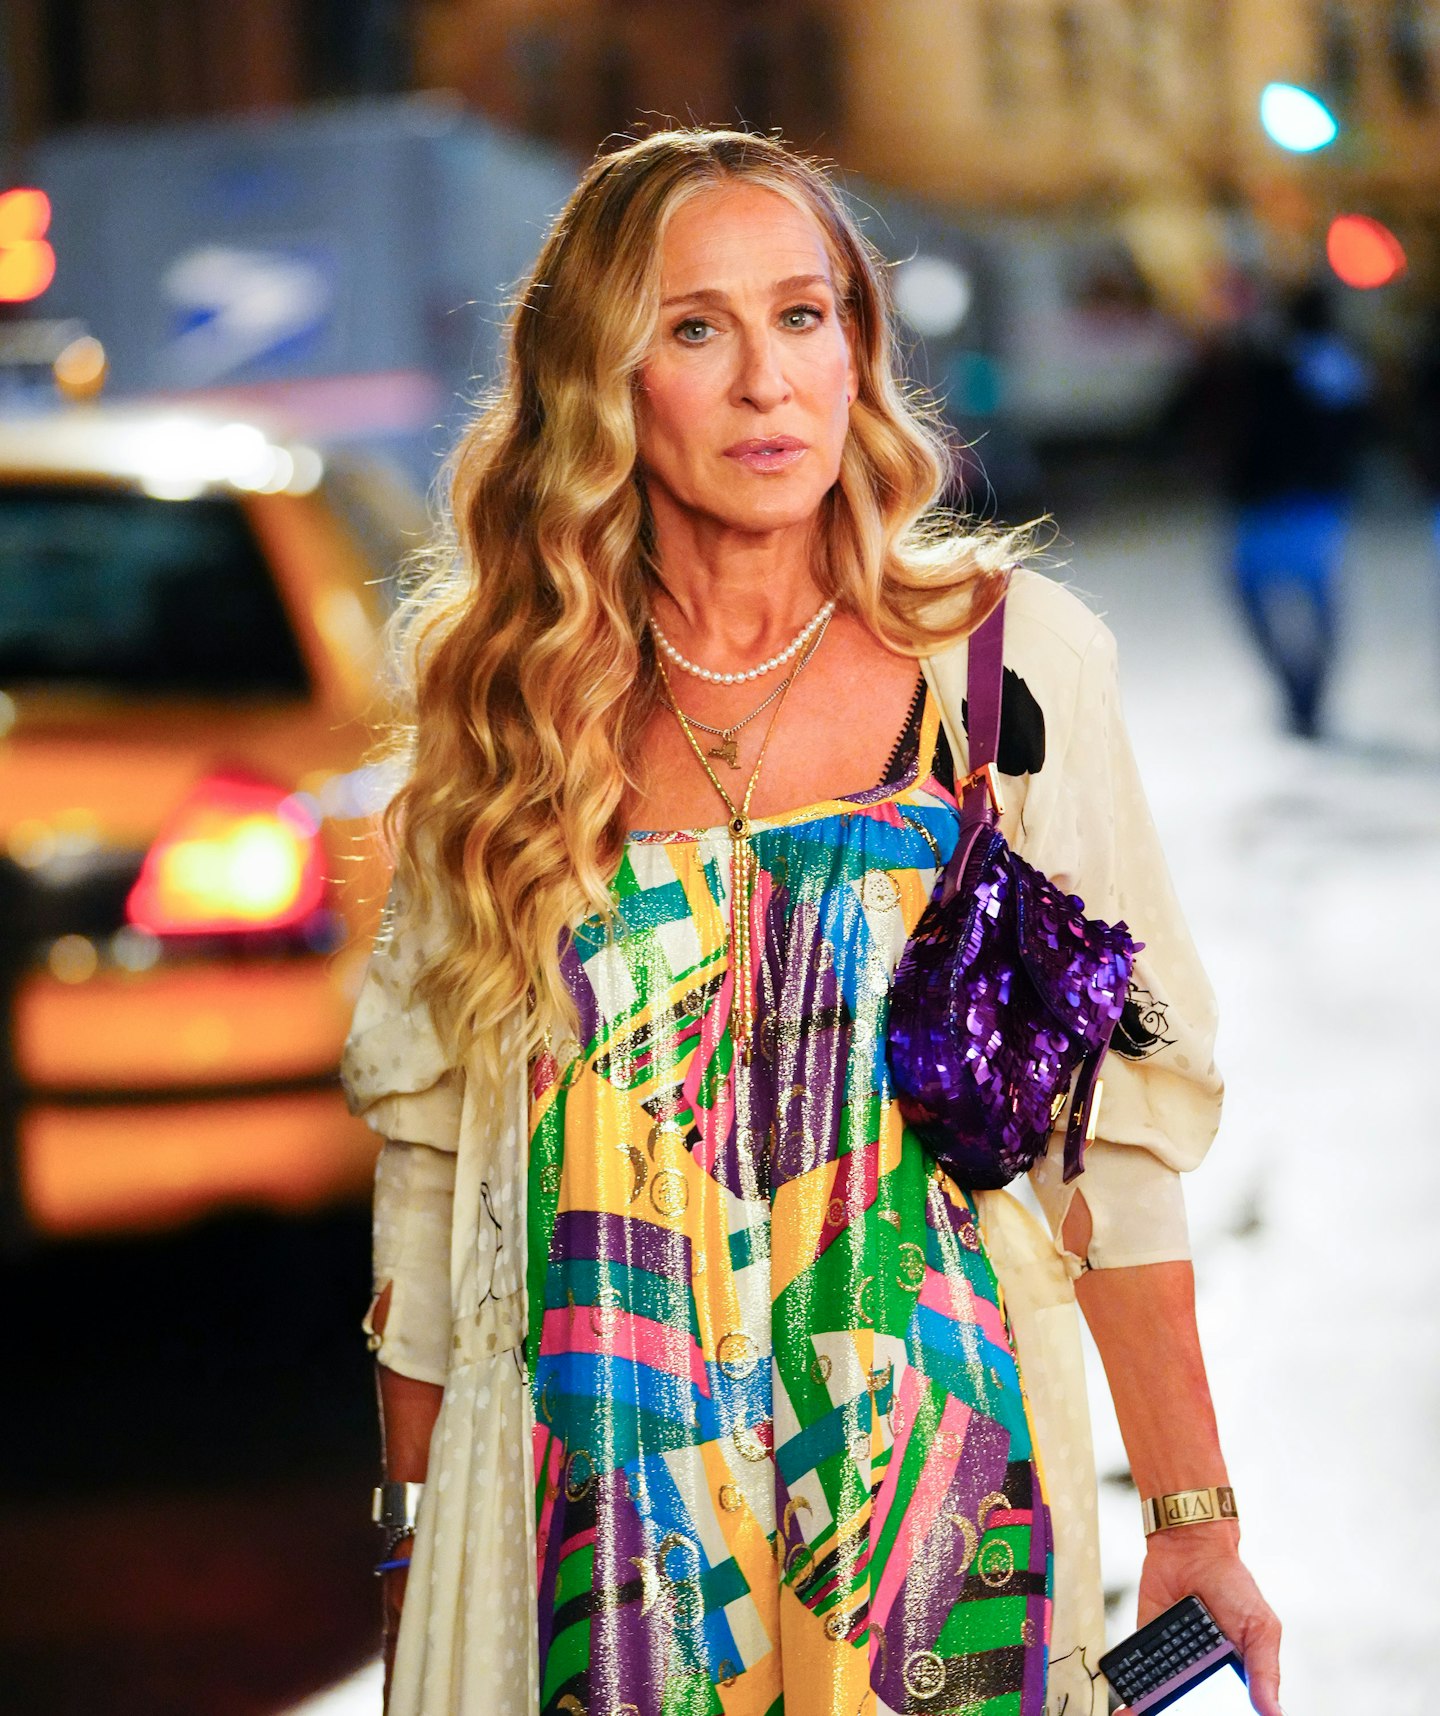 Even Carrie Bradshaw recycles her wardrobe